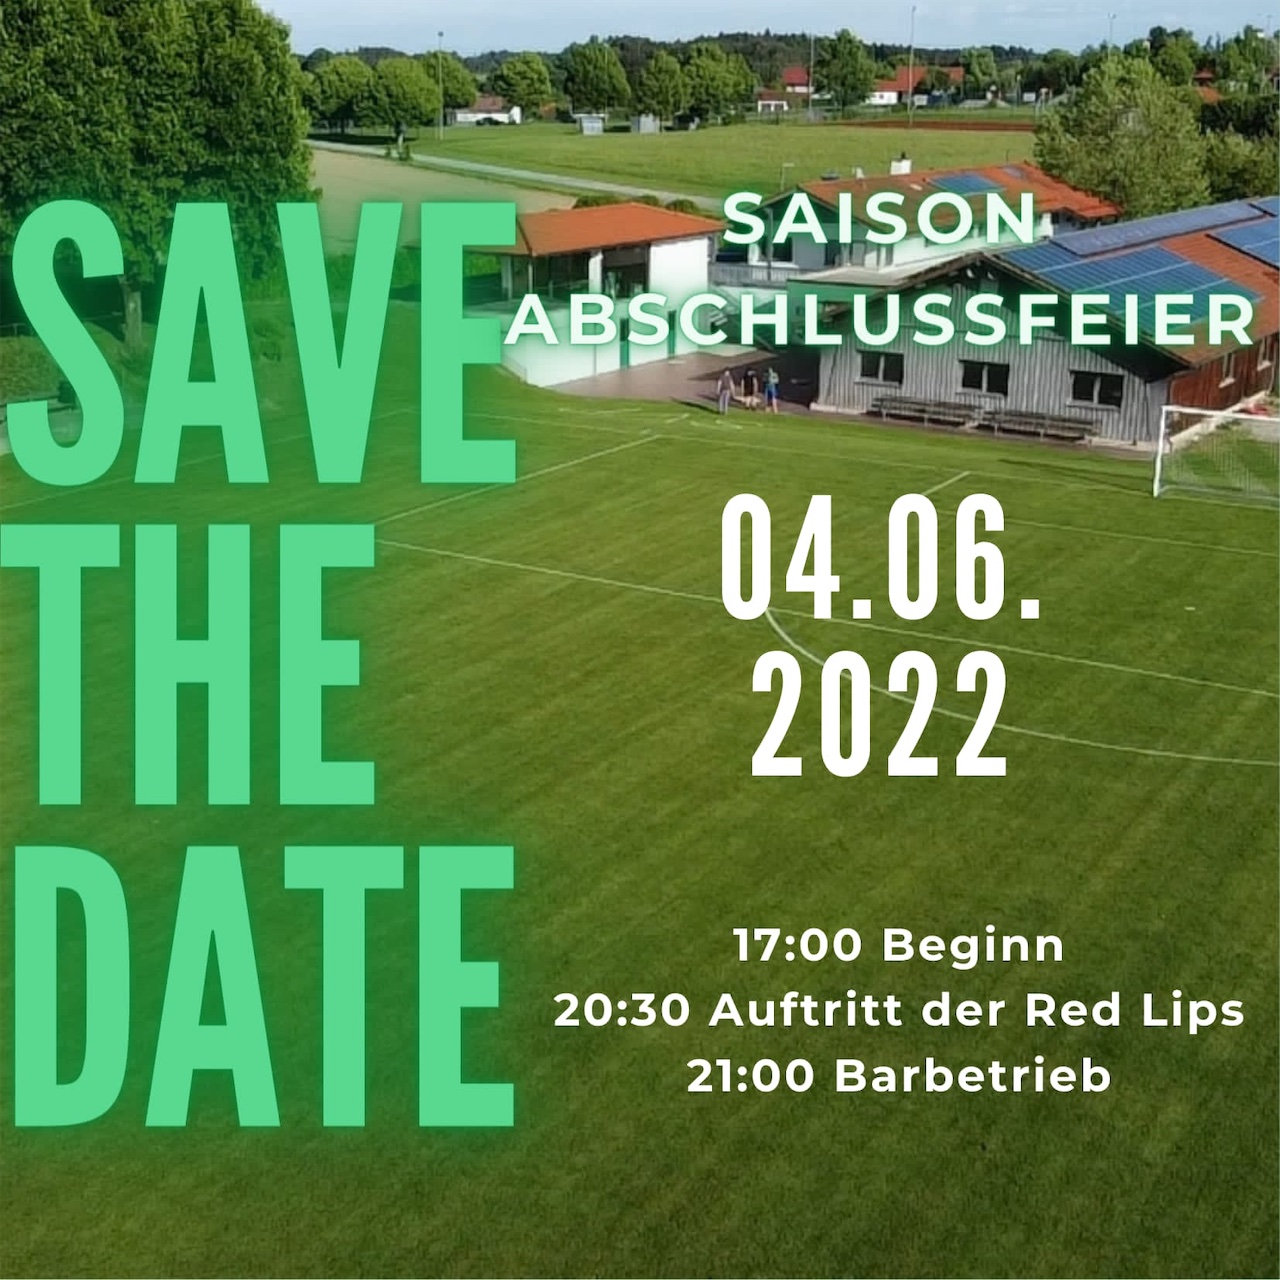 ⚽️⚽️⚽️Save the Date ⚽️⚽️⚽️